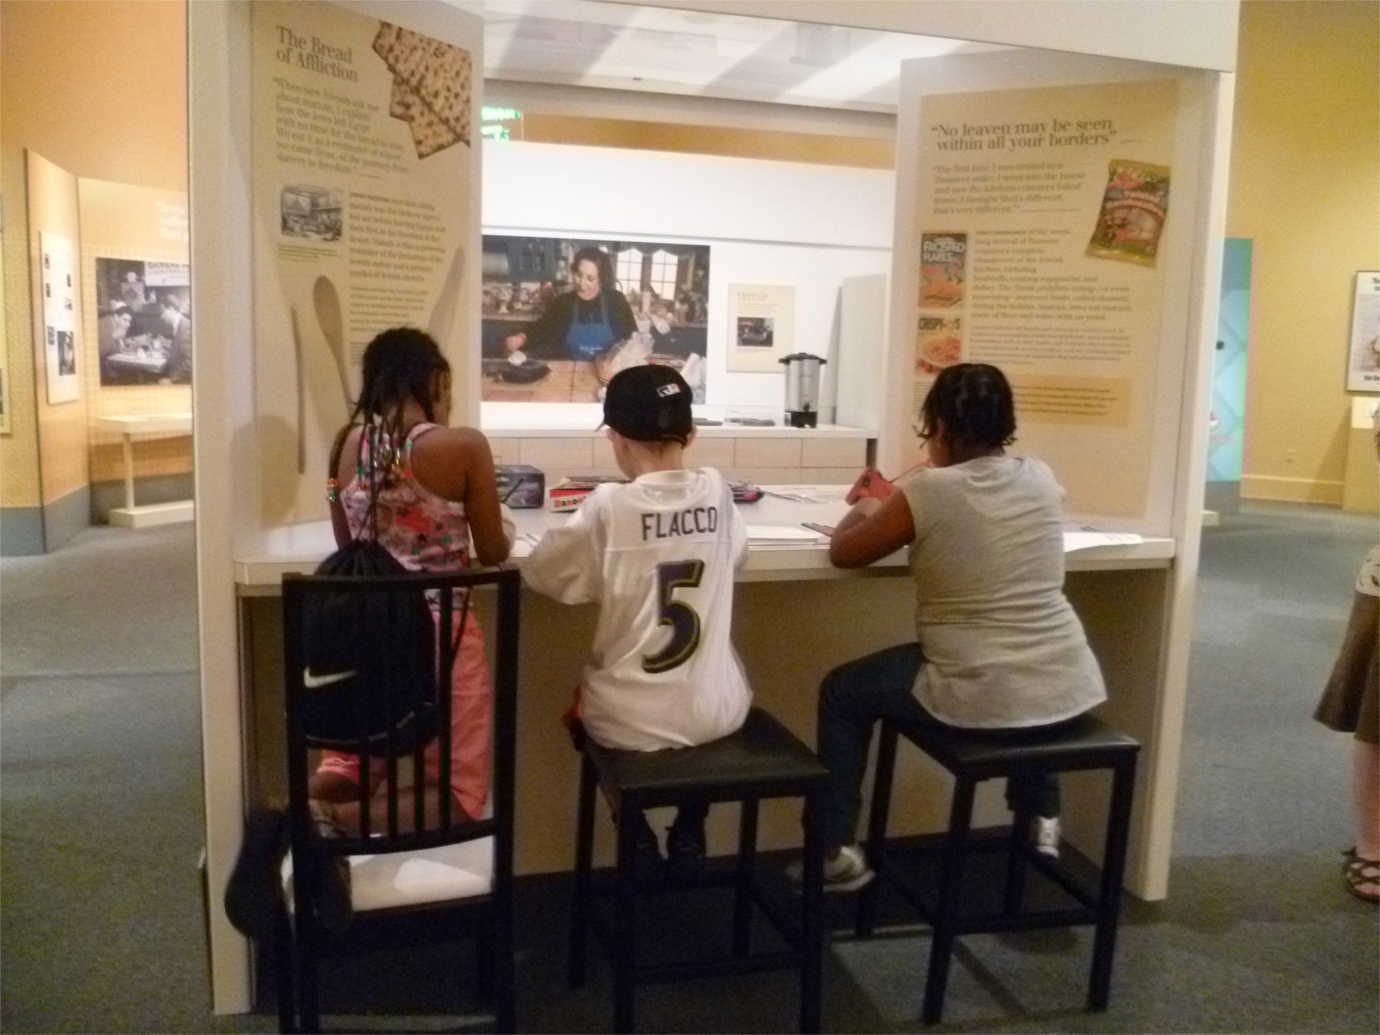 Students engage with an interactive installation, part of *Chosen Food: Cuisine, Culture, and American Jewish Identity.* Image courtesy of the Jewish Museum of Maryland.